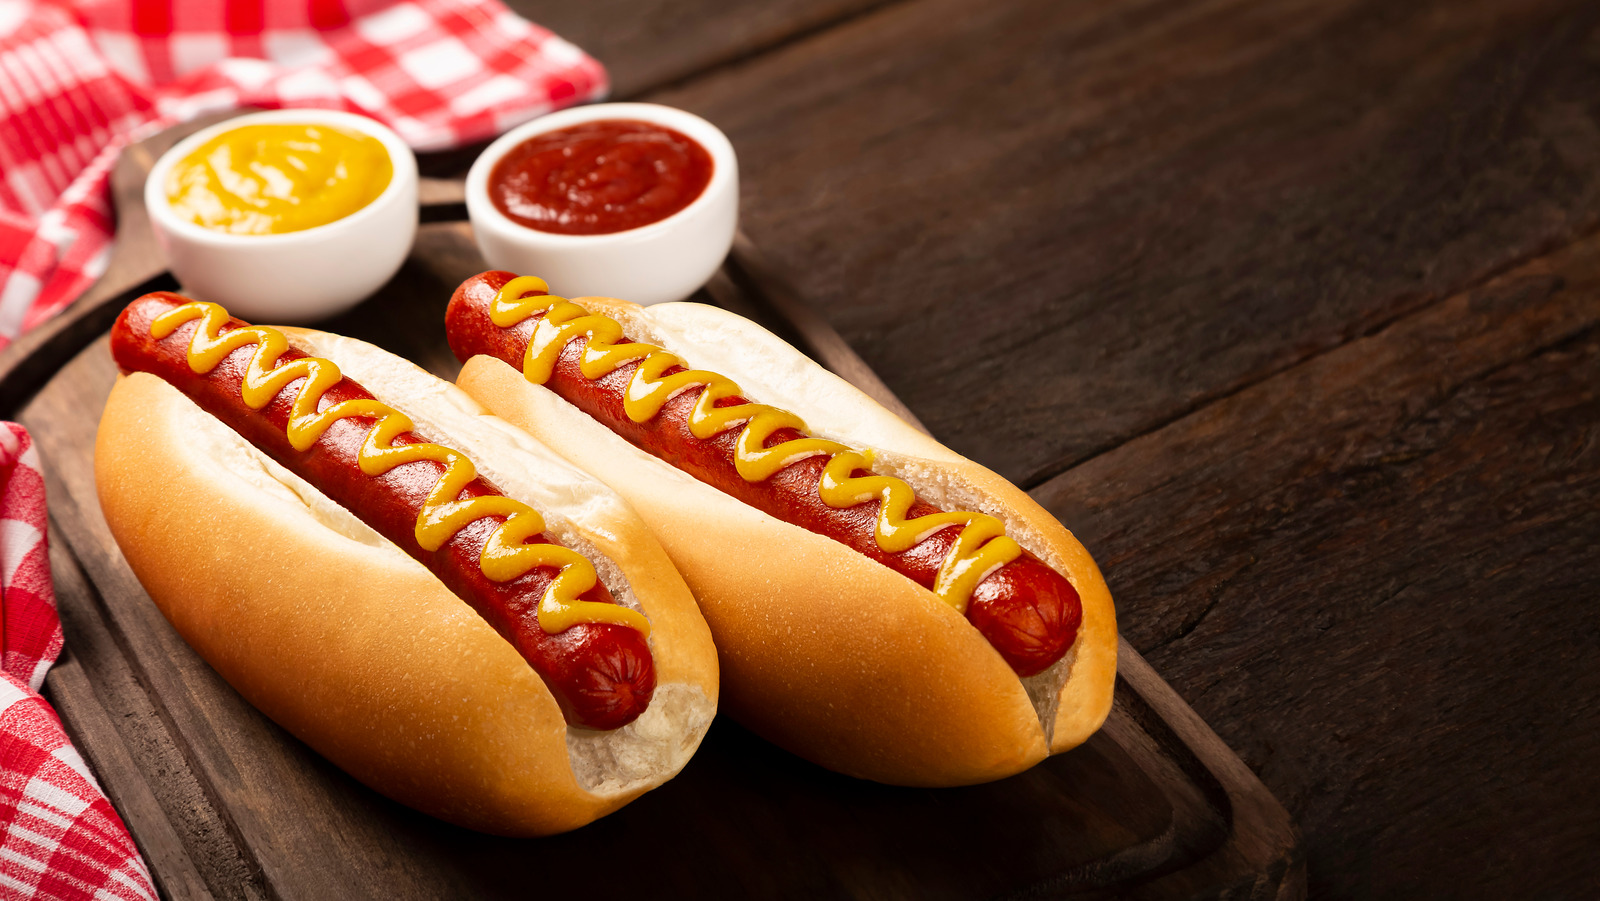 15 Top Hot Dog Spots to Try in Metro Detroit